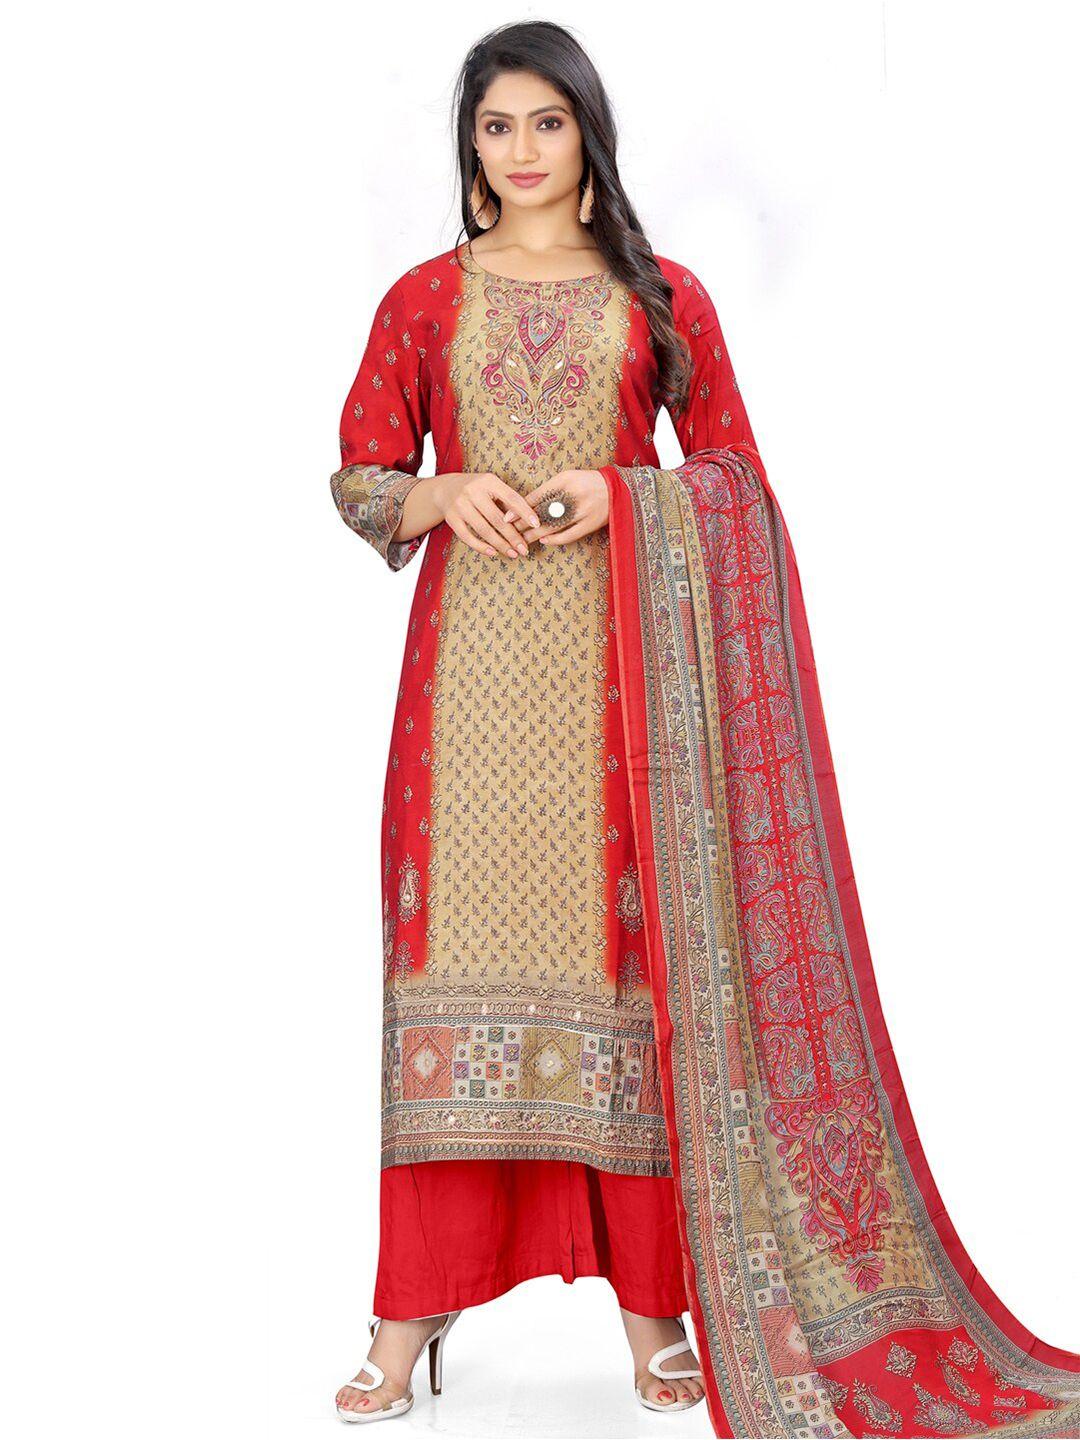 stylee lifestyle ethnic motifs printed unstitched dress material